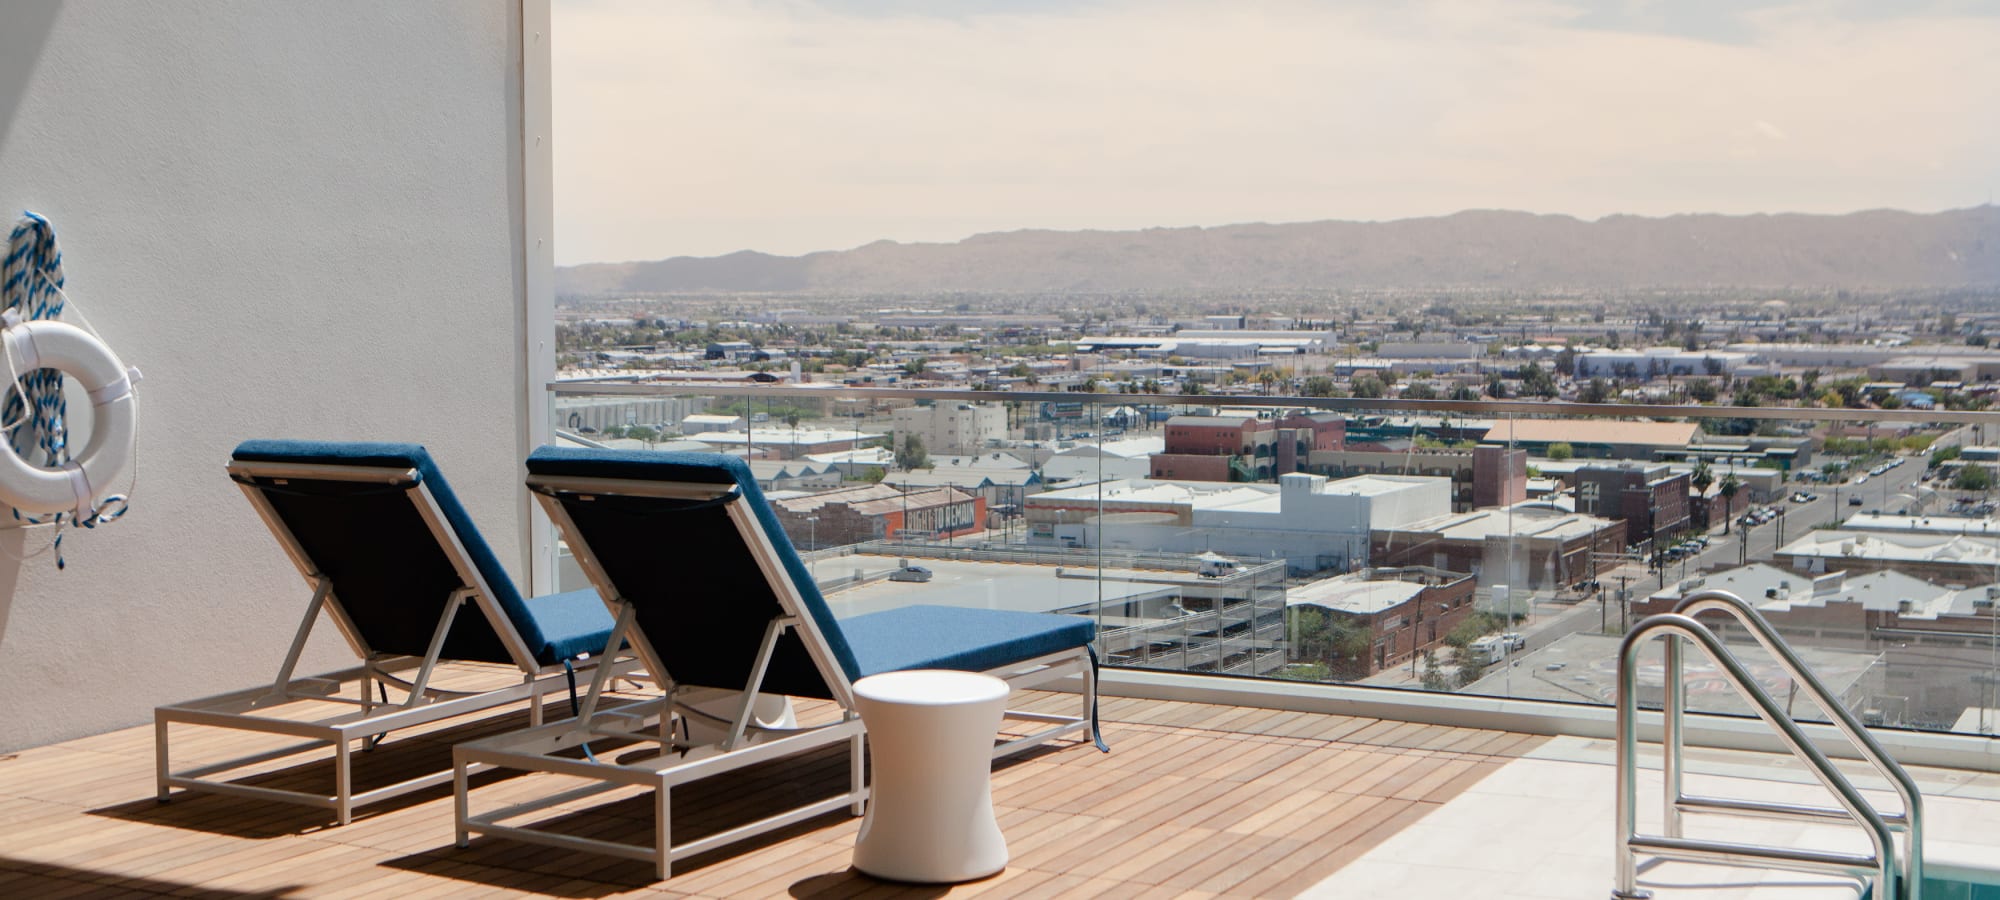 Gym Skydeck Pool Views at CityScape Residences in Phoenix, Arizona